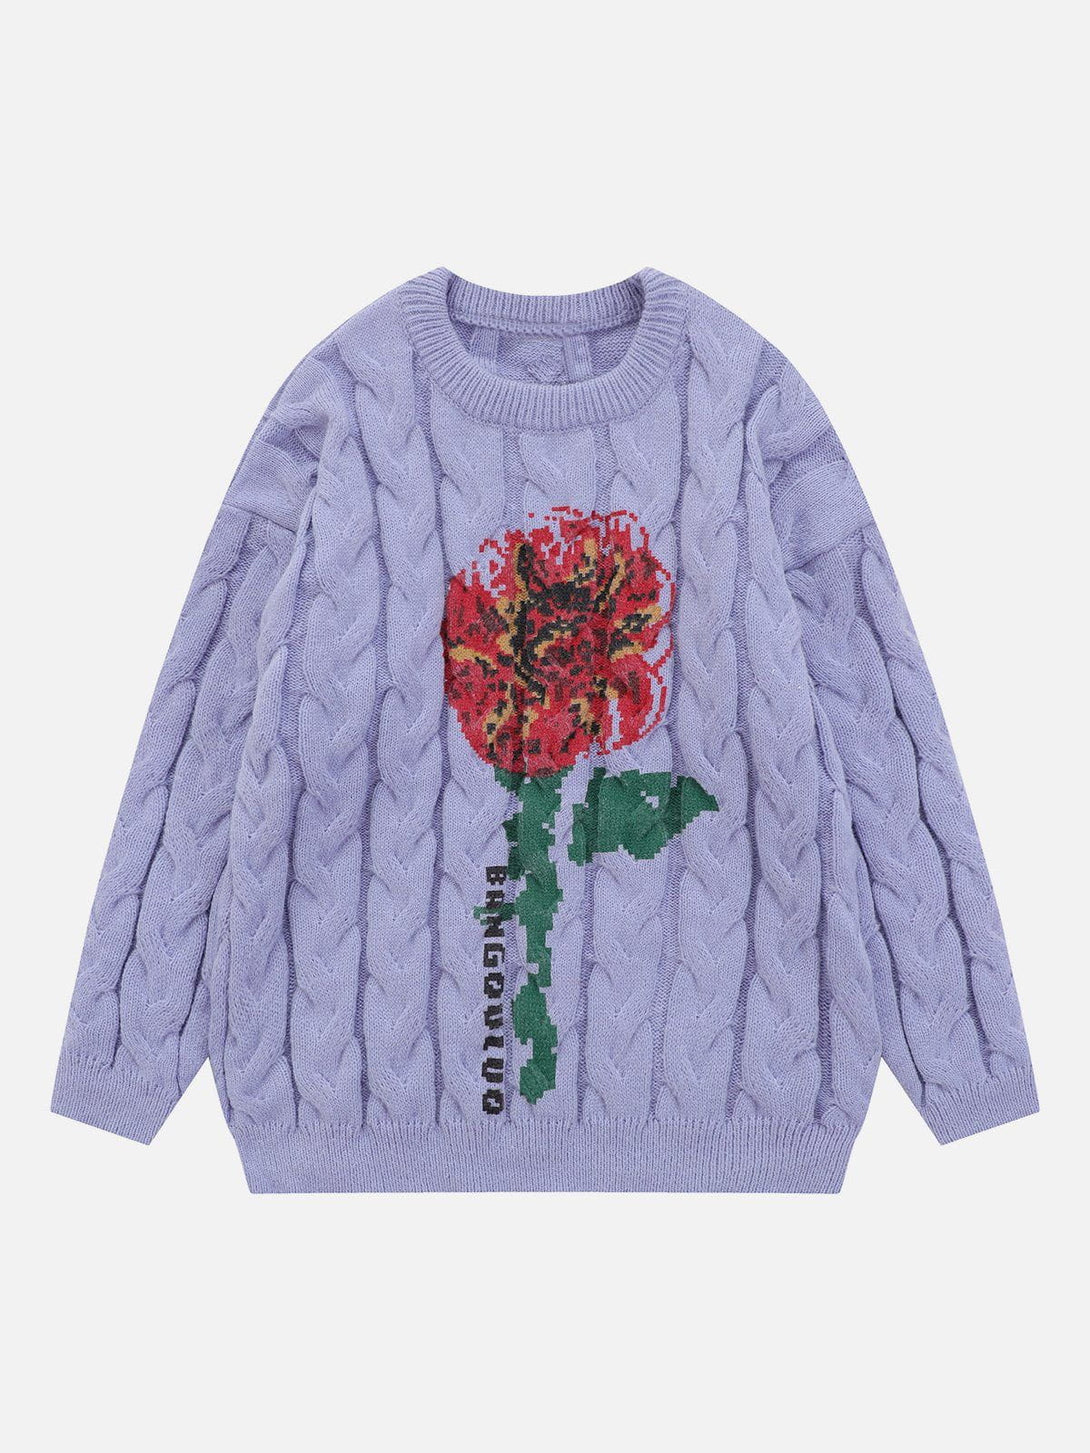 Majesda® - Flower Embroidery Sweater outfit ideas streetwear fashion